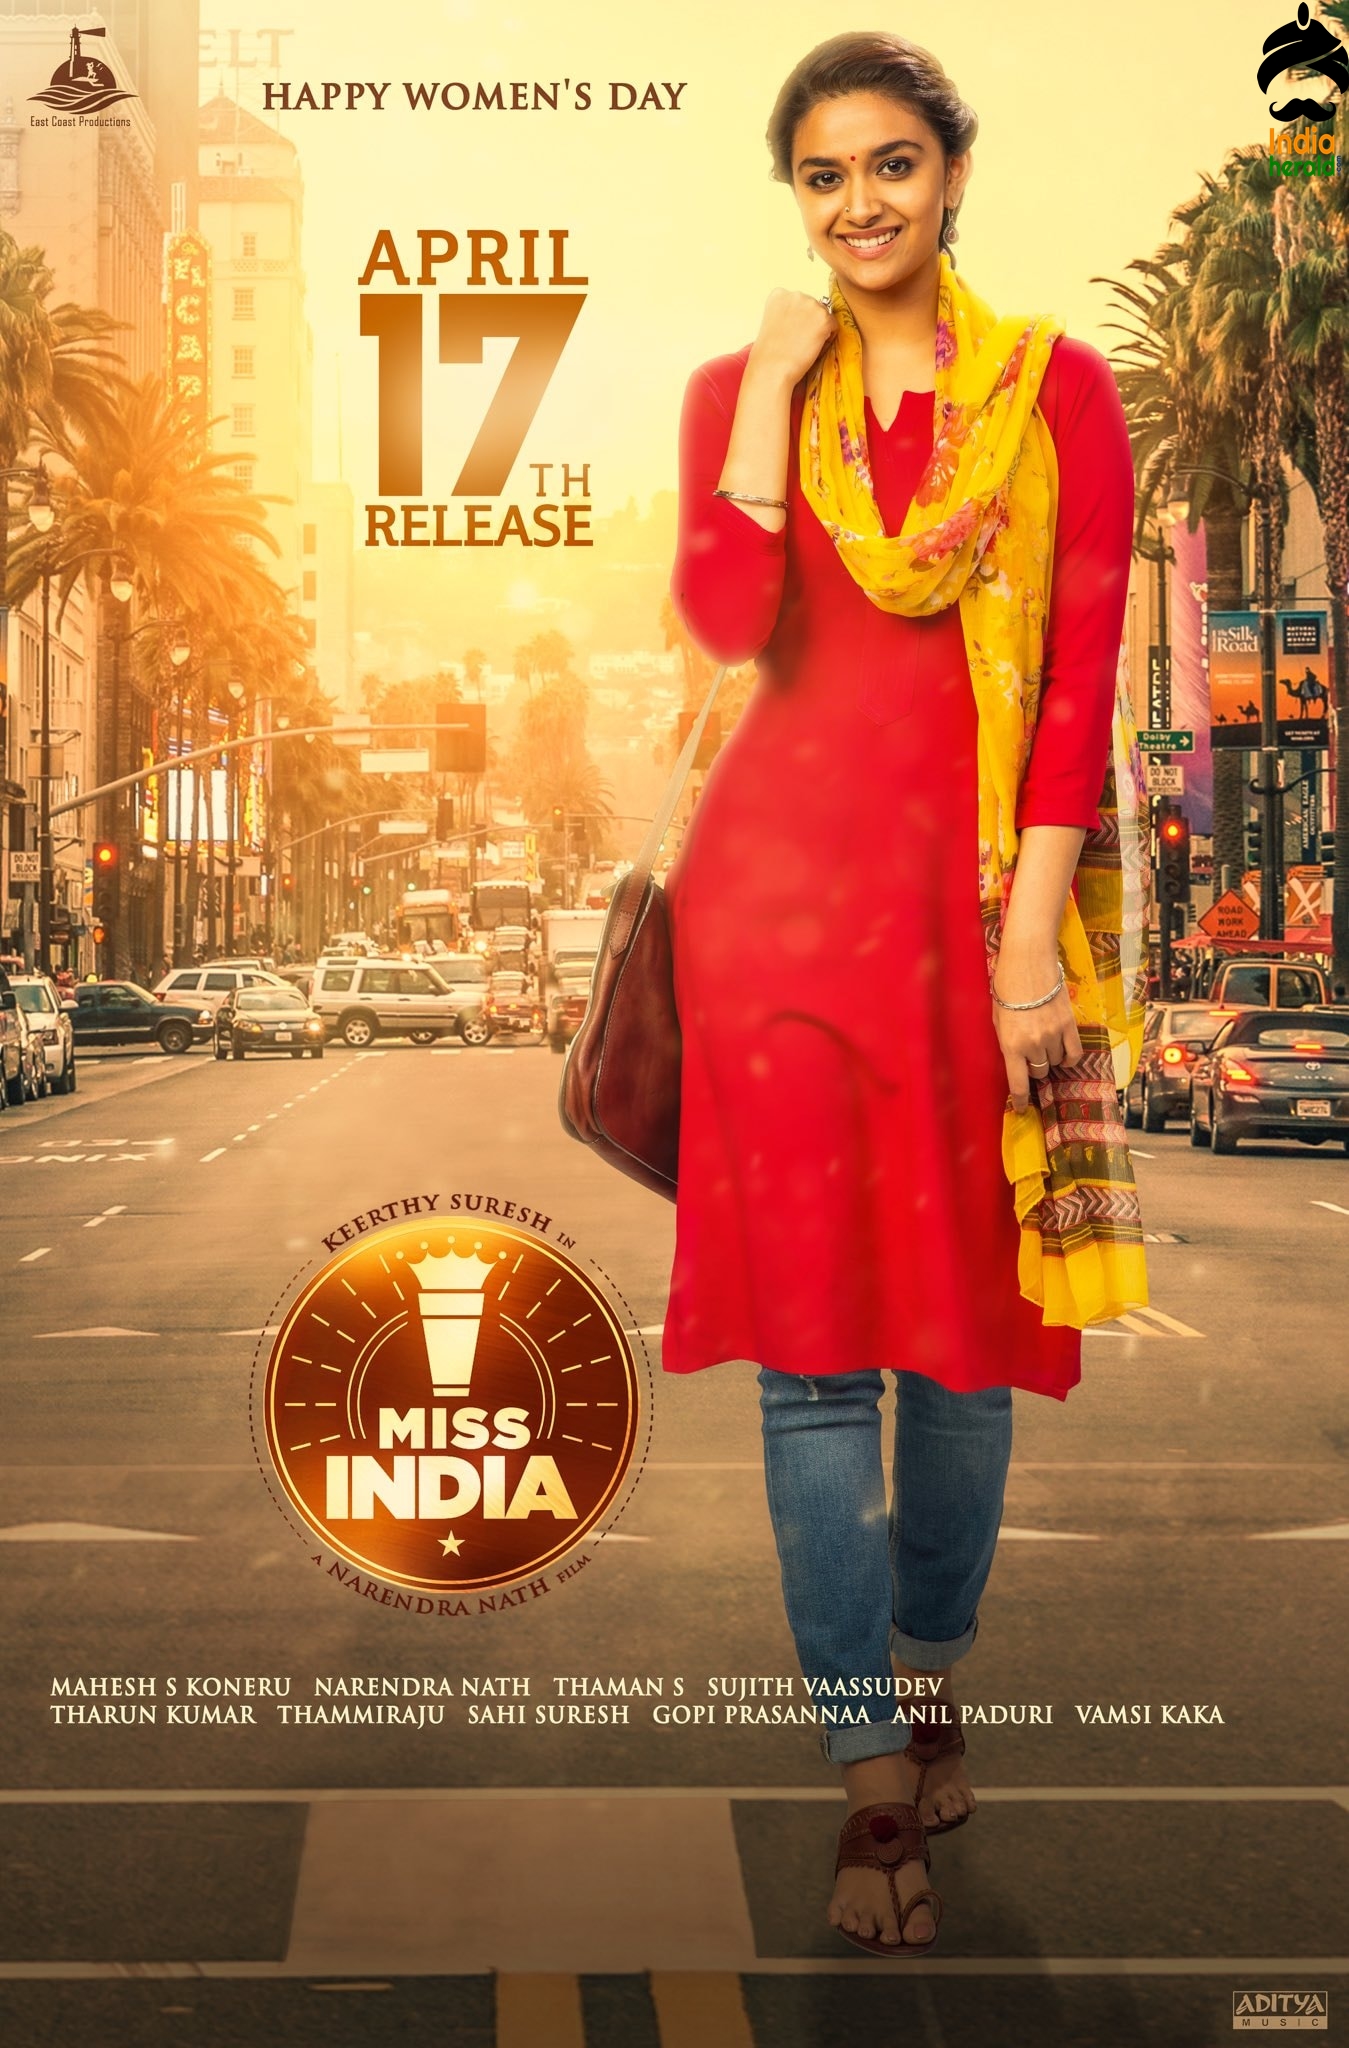 New Poster of Keerthy Suresh next MISS INDIA directed by debutant Narendra Nath